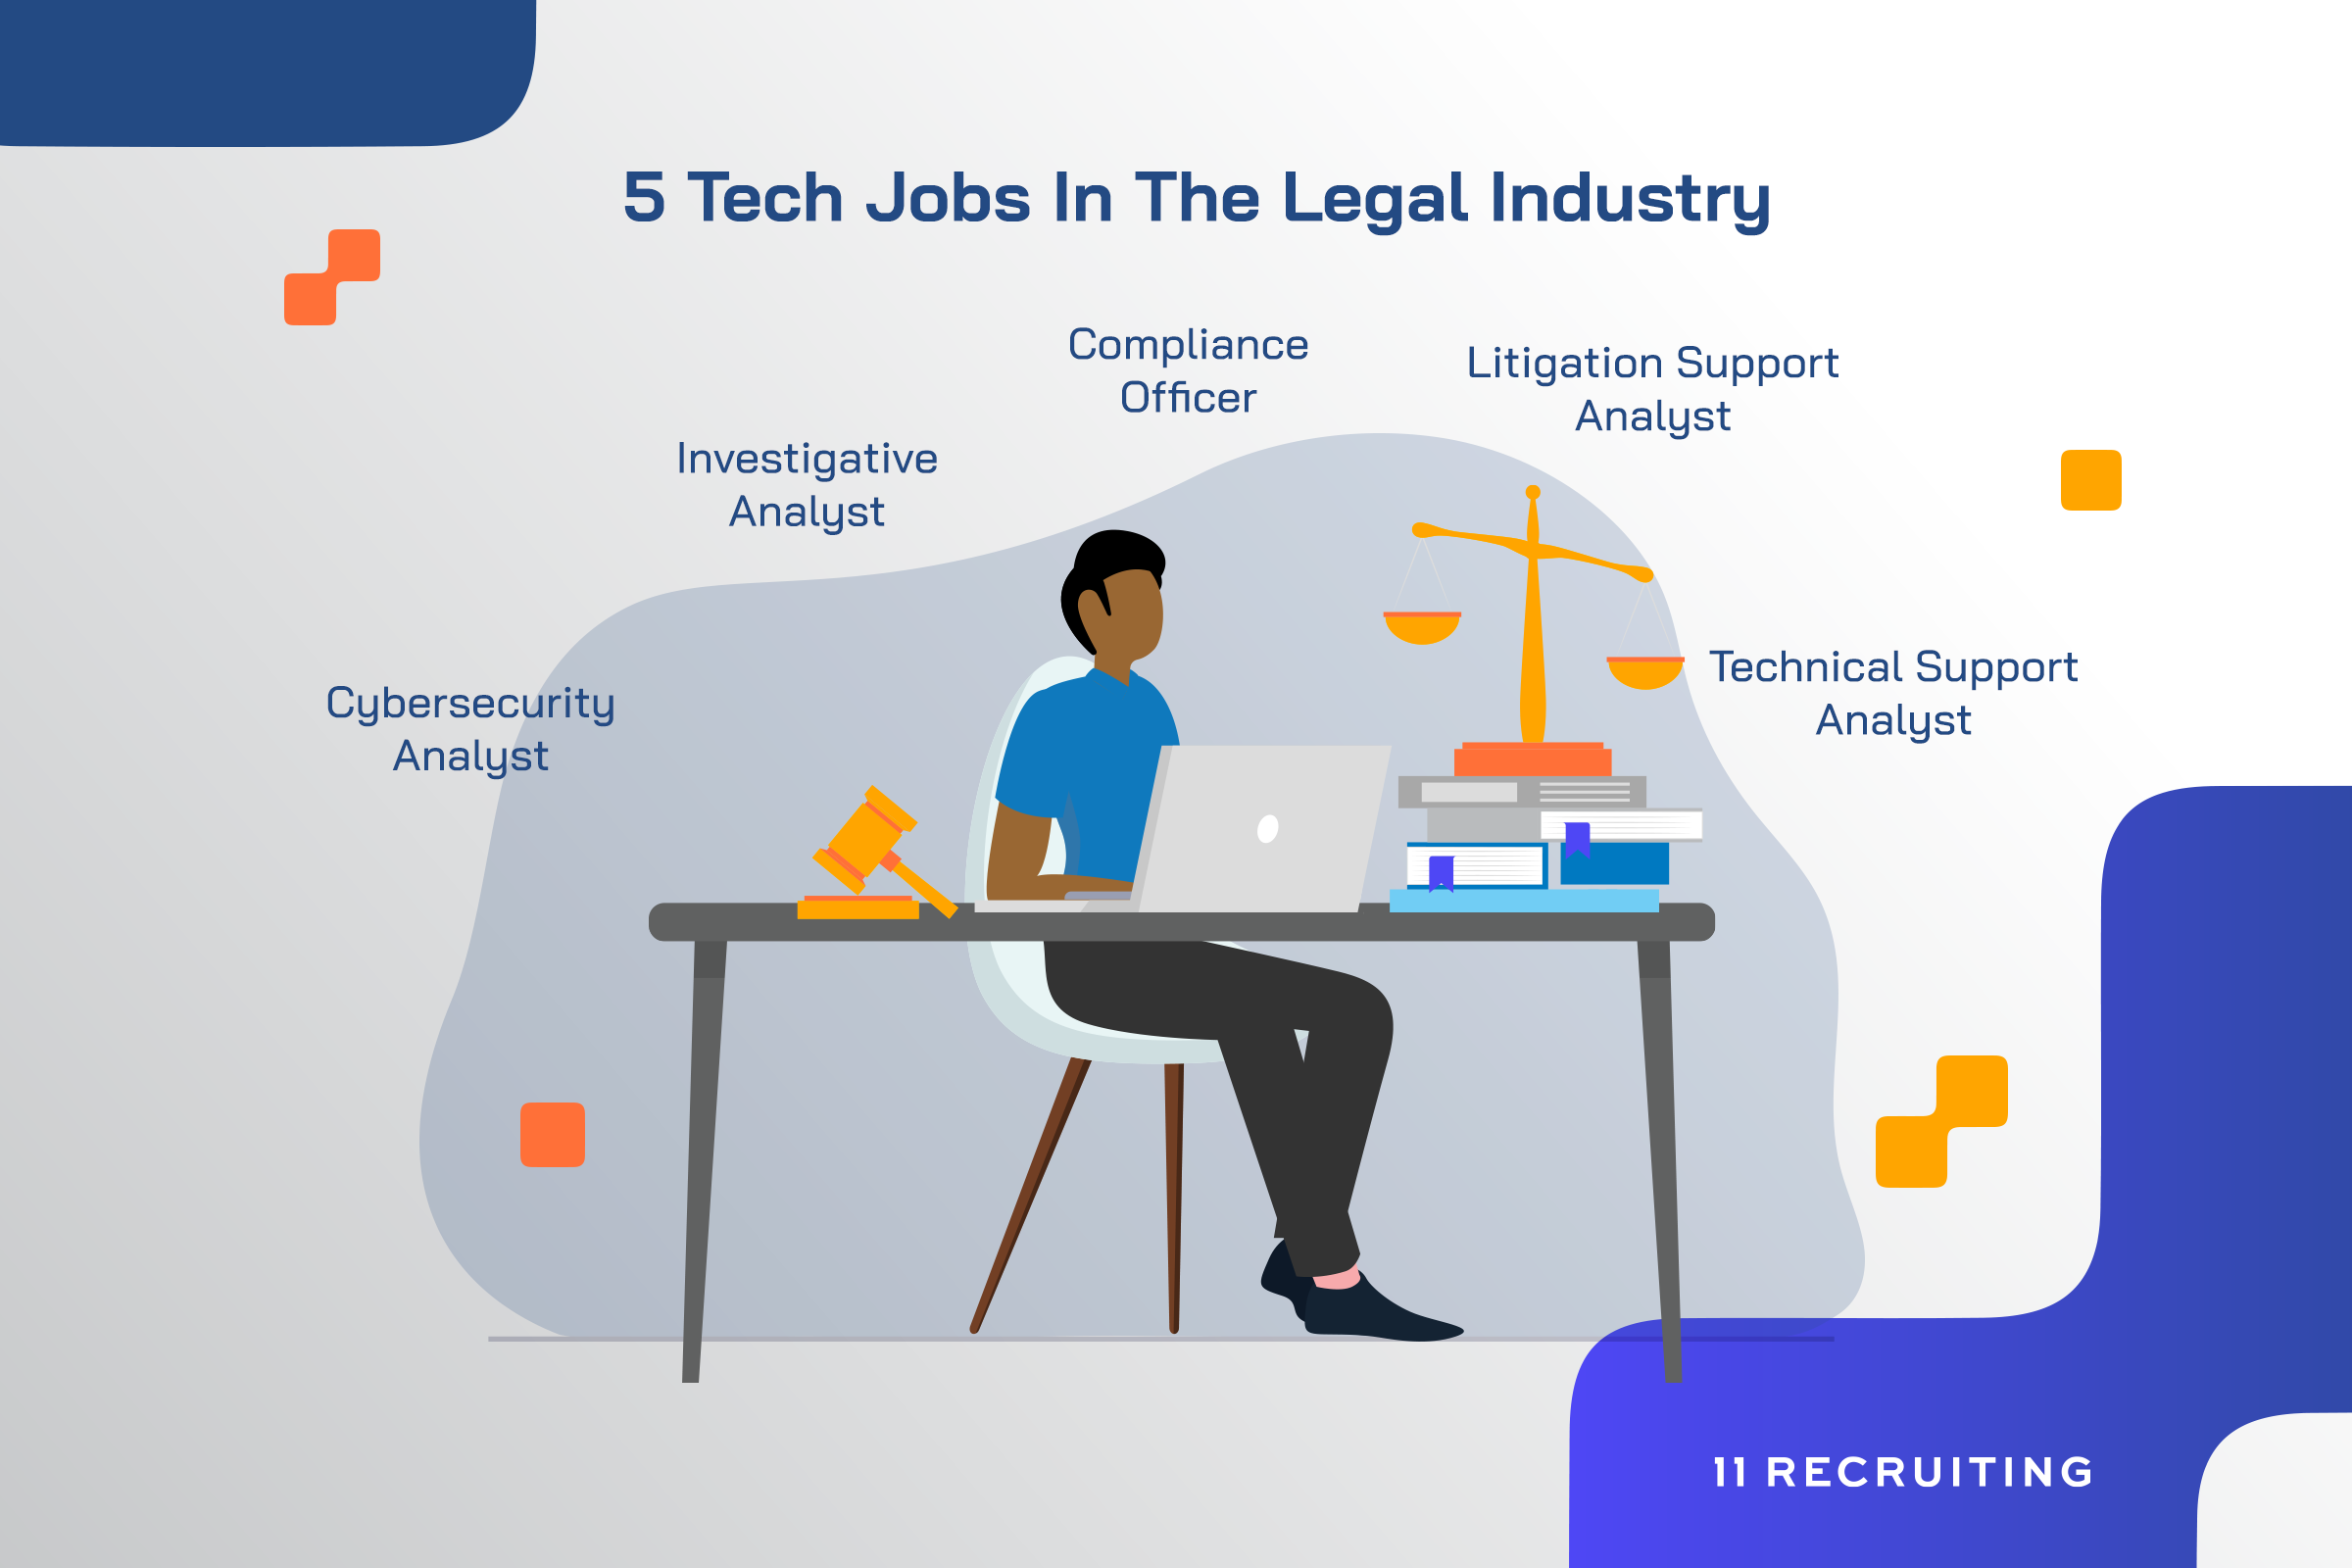 5 Tech jobs in the legal industry